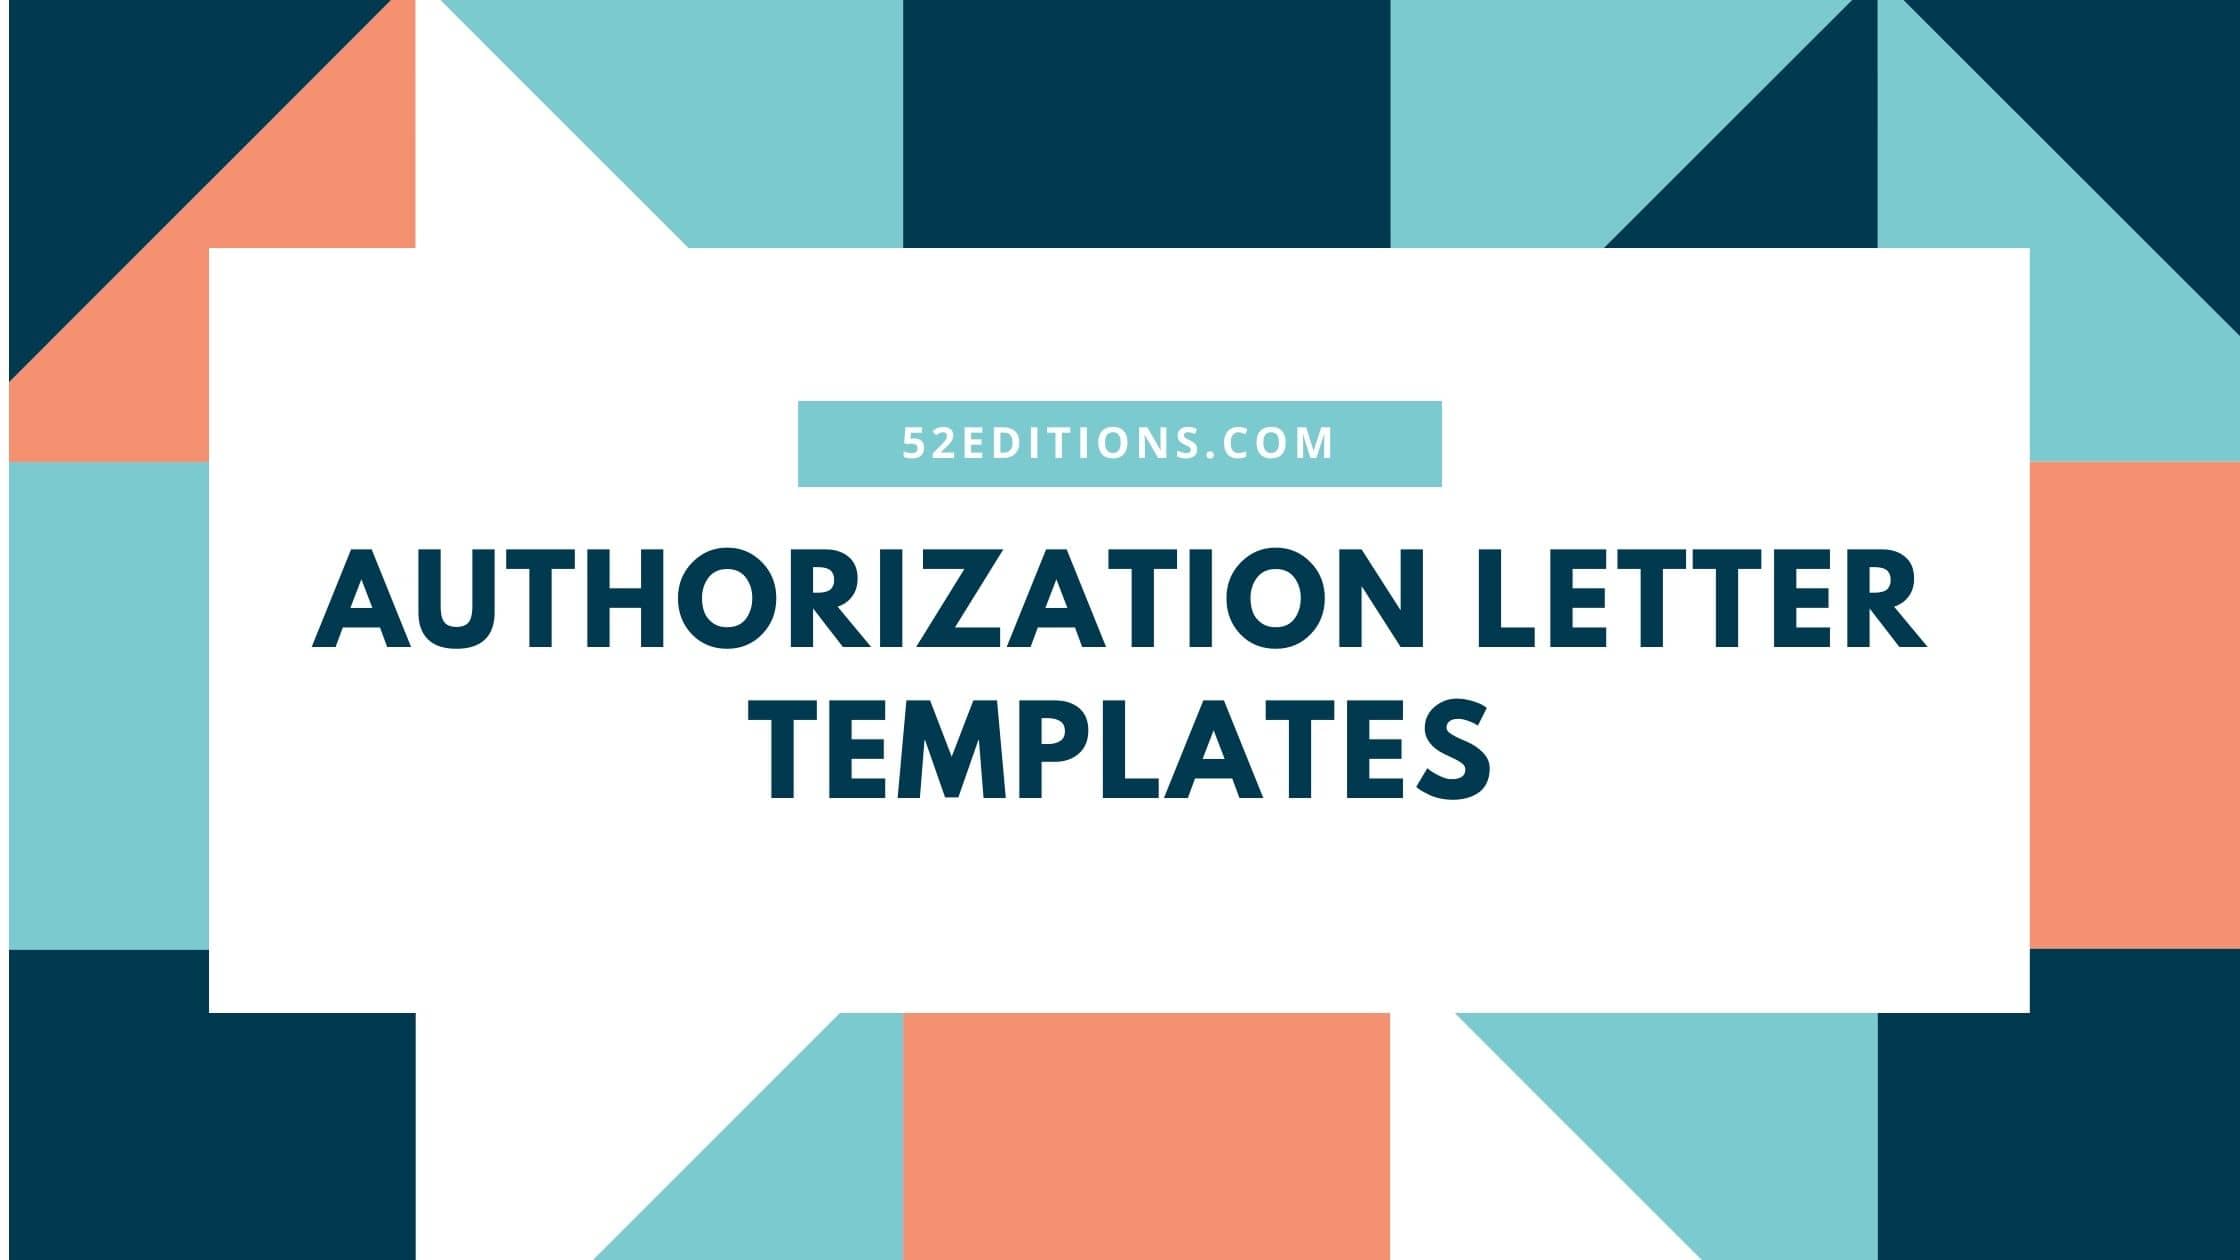 Sample Authorization Letters // FREE Letter Templates